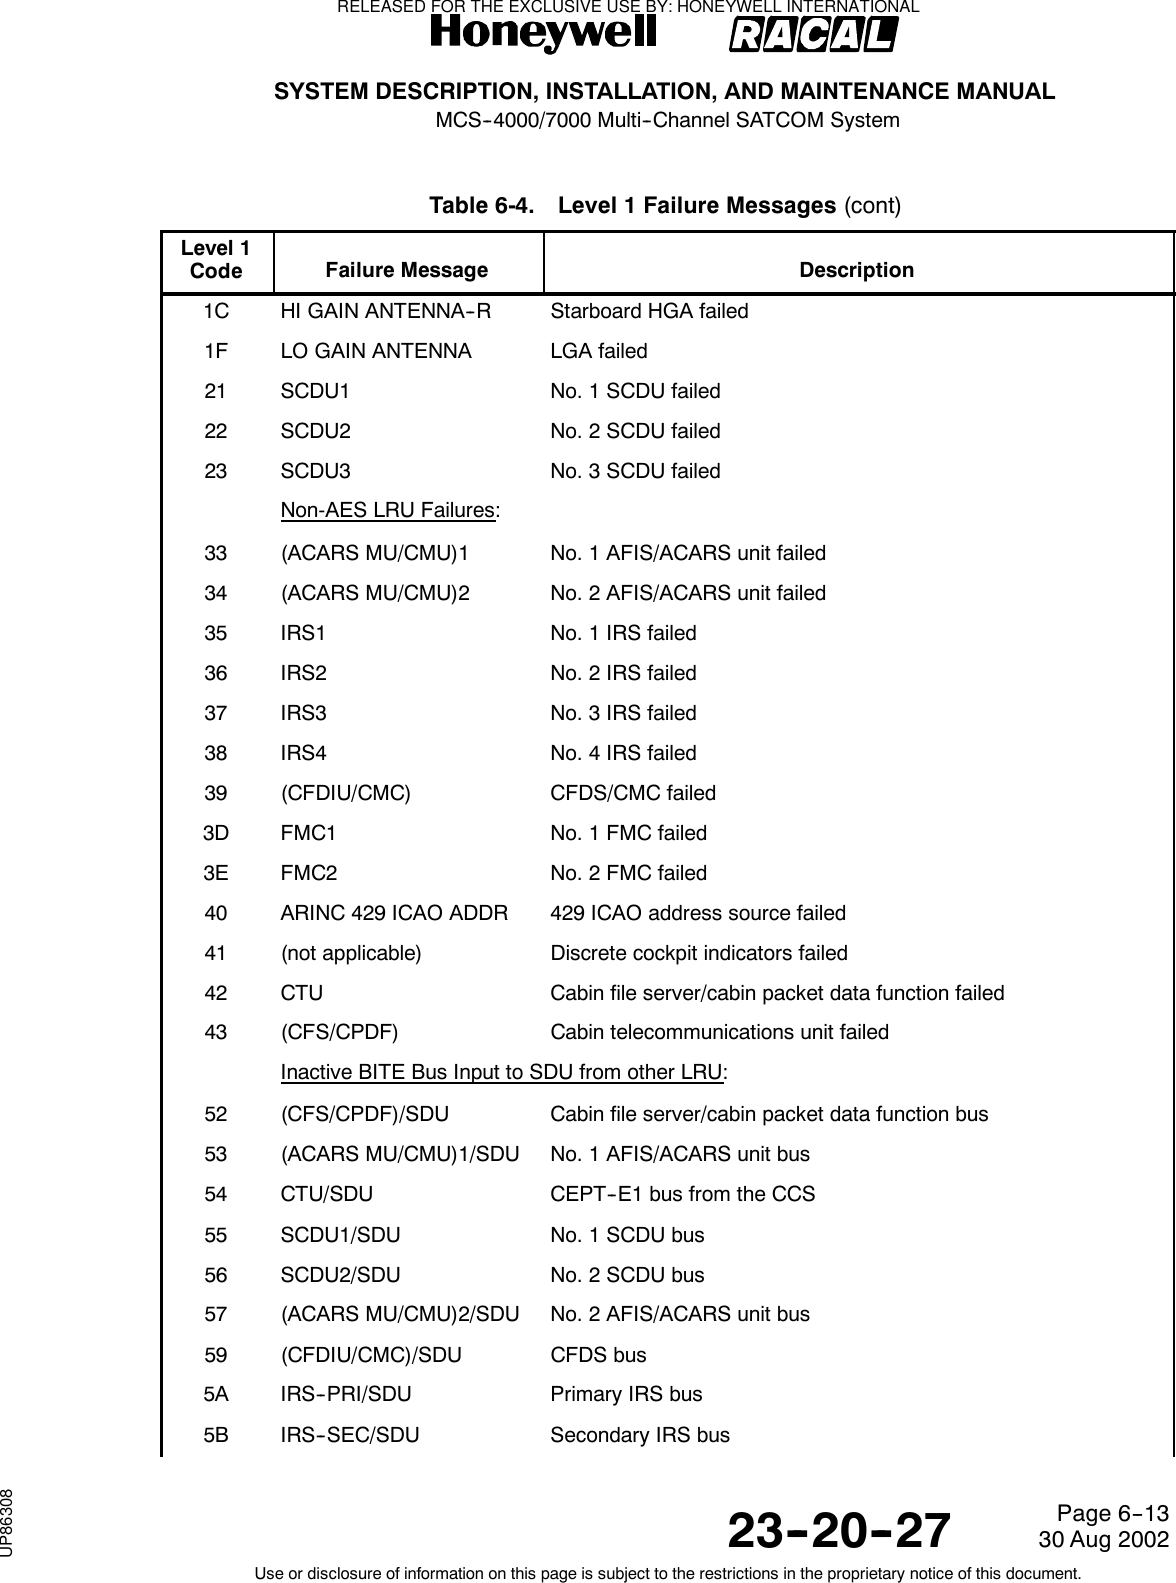 SYSTEM DESCRIPTION, INSTALLATION, AND MAINTENANCE MANUALMCS--4000/7000 Multi--Channel SATCOM System23--20--2730 Aug 2002Use or disclosure of information on this page is subject to the restrictions in the proprietary notice of this document.Page 6--13Table 6-4. Level 1 Failure Messages (cont)Level 1Code DescriptionFailure Message1C HI GAIN ANTENNA--R Starboard HGA failed1F LO GAIN ANTENNA LGA failed21 SCDU1 No. 1 SCDU failed22 SCDU2 No. 2 SCDU failed23 SCDU3 No. 3 SCDU failedNon-AES LRU Failures:33 (ACARS MU/CMU)1 No. 1 AFIS/ACARS unit failed34 (ACARS MU/CMU)2 No. 2 AFIS/ACARS unit failed35 IRS1 No. 1 IRS failed36 IRS2 No. 2 IRS failed37 IRS3 No. 3 IRS failed38 IRS4 No. 4 IRS failed39 (CFDIU/CMC) CFDS/CMC failed3D FMC1 No. 1 FMC failed3E FMC2 No. 2 FMC failed40 ARINC 429 ICAO ADDR 429 ICAO address source failed41 (not applicable) Discrete cockpit indicators failed42 CTU Cabin file server/cabin packet data function failed43 (CFS/CPDF) Cabin telecommunications unit failedInactive BITE Bus Input to SDU from other LRU:52 (CFS/CPDF)/SDU Cabin file server/cabin packet data function bus53 (ACARS MU/CMU)1/SDU No. 1 AFIS/ACARS unit bus54 CTU/SDU CEPT--E1 bus from the CCS55 SCDU1/SDU No. 1 SCDU bus56 SCDU2/SDU No. 2 SCDU bus57 (ACARS MU/CMU)2/SDU No. 2 AFIS/ACARS unit bus59 (CFDIU/CMC)/SDU CFDS bus5A IRS--PRI/SDU Primary IRS bus5B IRS--SEC/SDU Secondary IRS busRELEASED FOR THE EXCLUSIVE USE BY: HONEYWELL INTERNATIONALUP86308